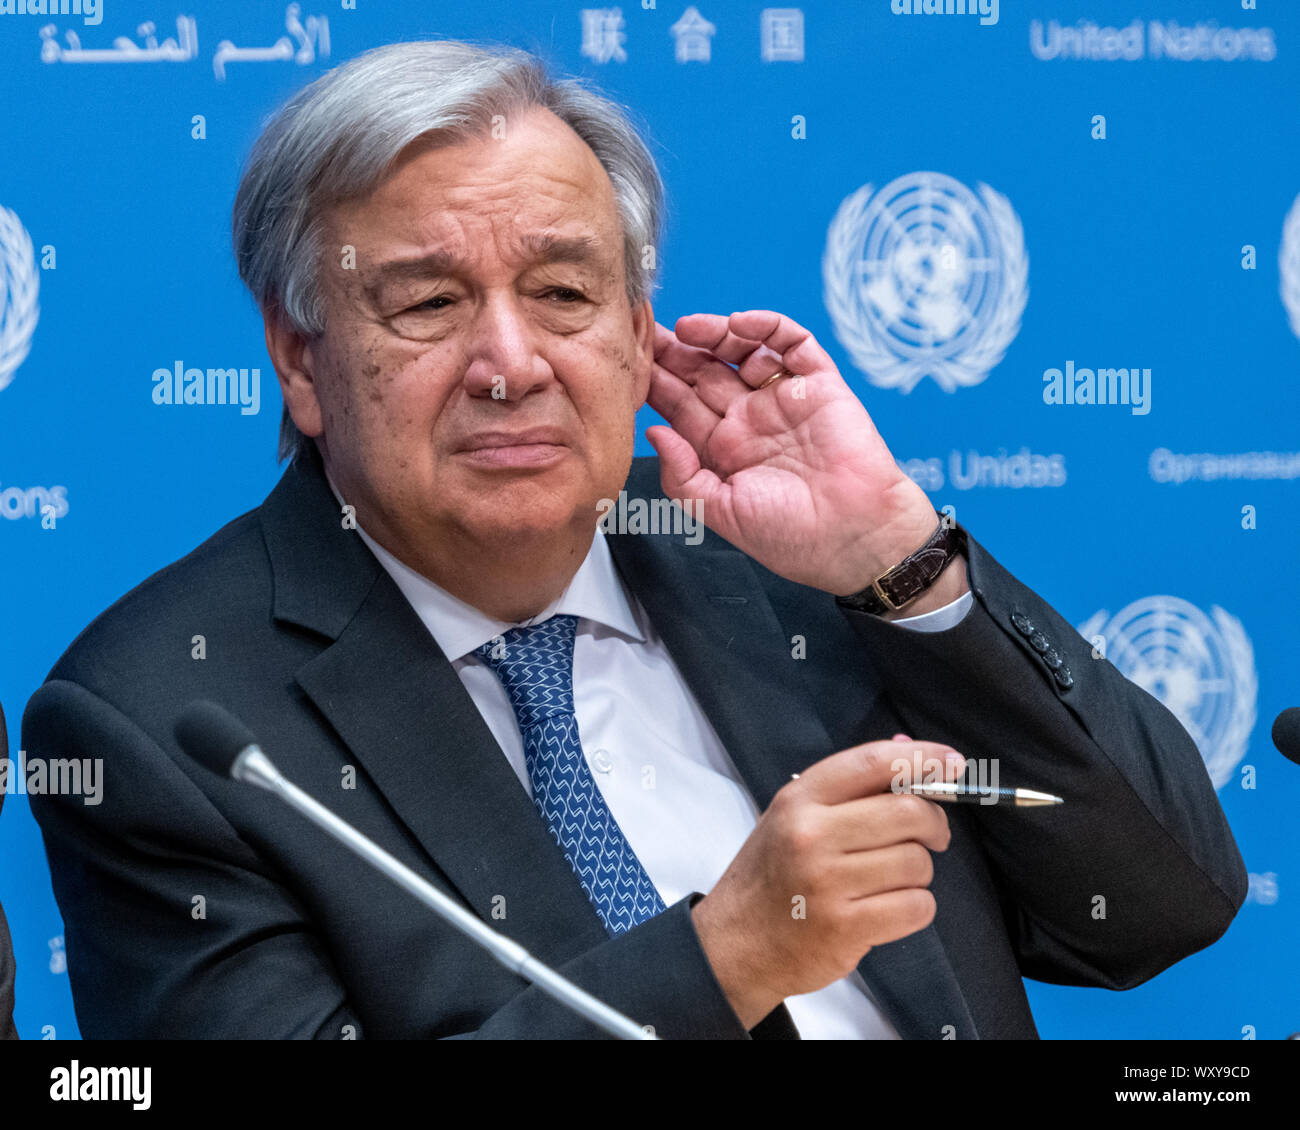 New York, USA,  18 September 2019.  United Nations Secretary-General Antonio Guterres listens to a question during a news briefing to mark the opening of the 74th session of the UN General Assembly in New York City.   Credit: Enrique Shore/Alamy Live News Stock Photo